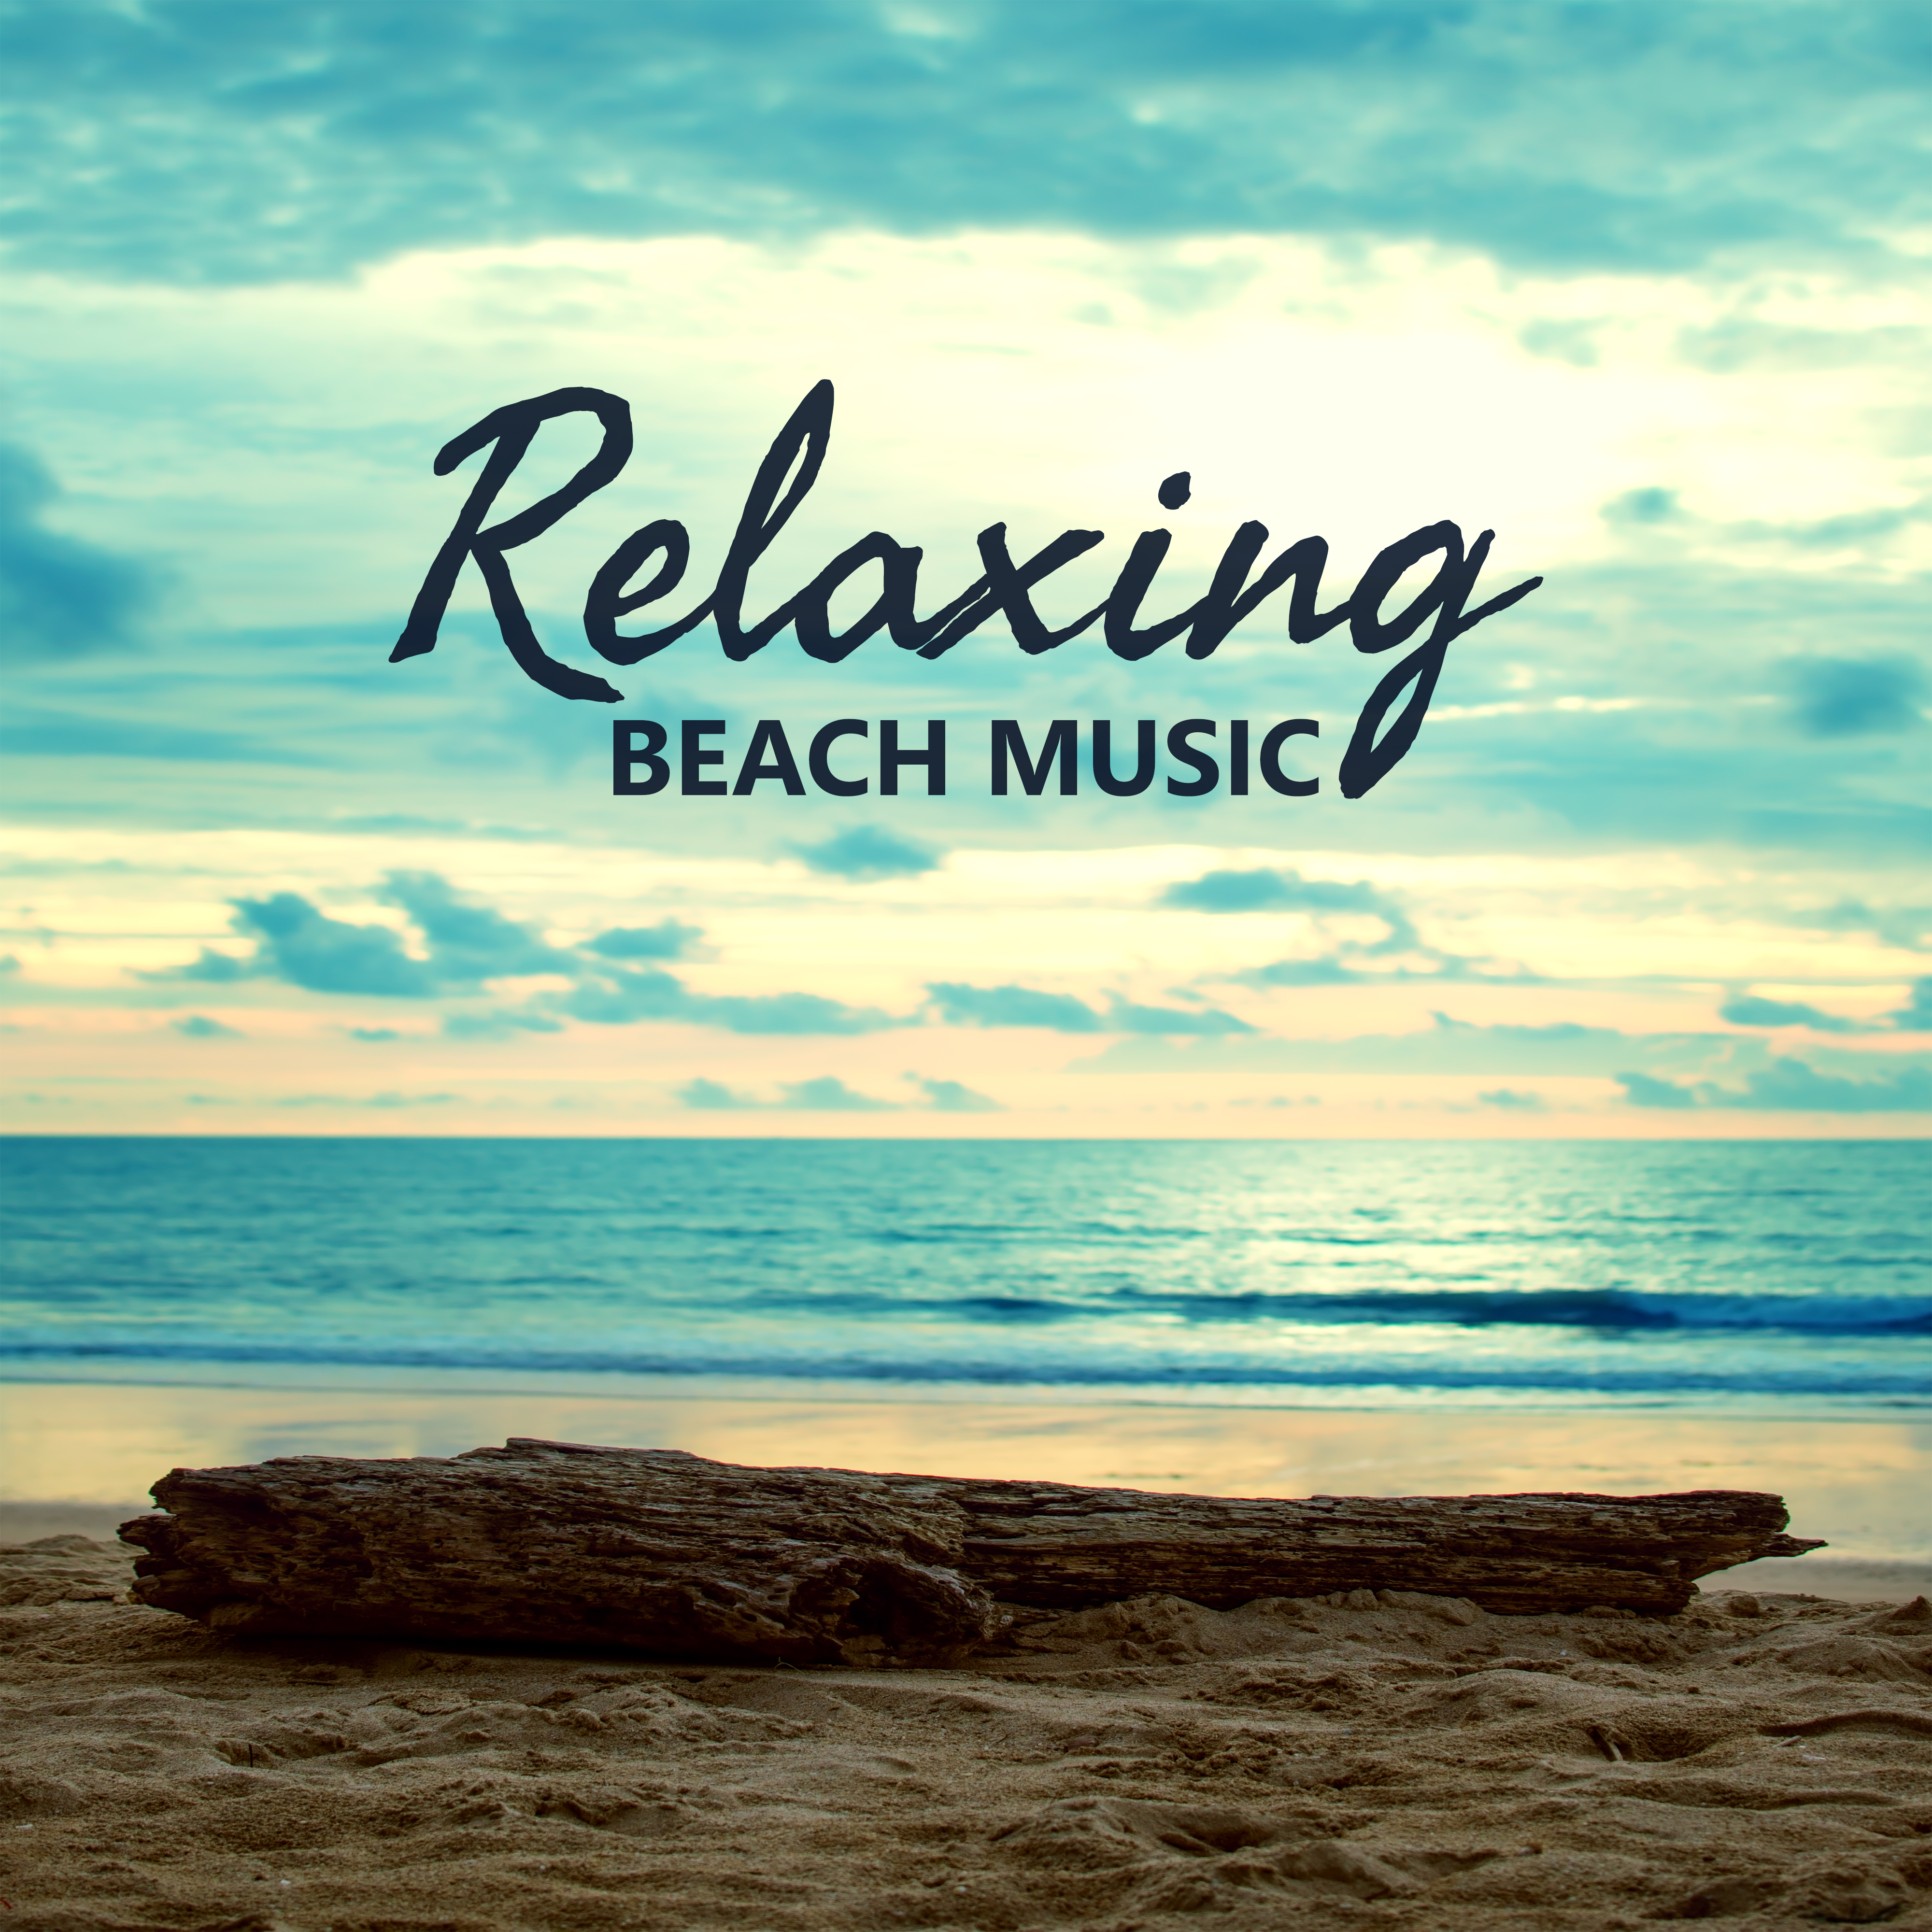 Relaxing Beach Music  Summer Chill Out Vibes, Relaxation in Sun, Holiday Time, Rest a Bit, Peaceful Waves